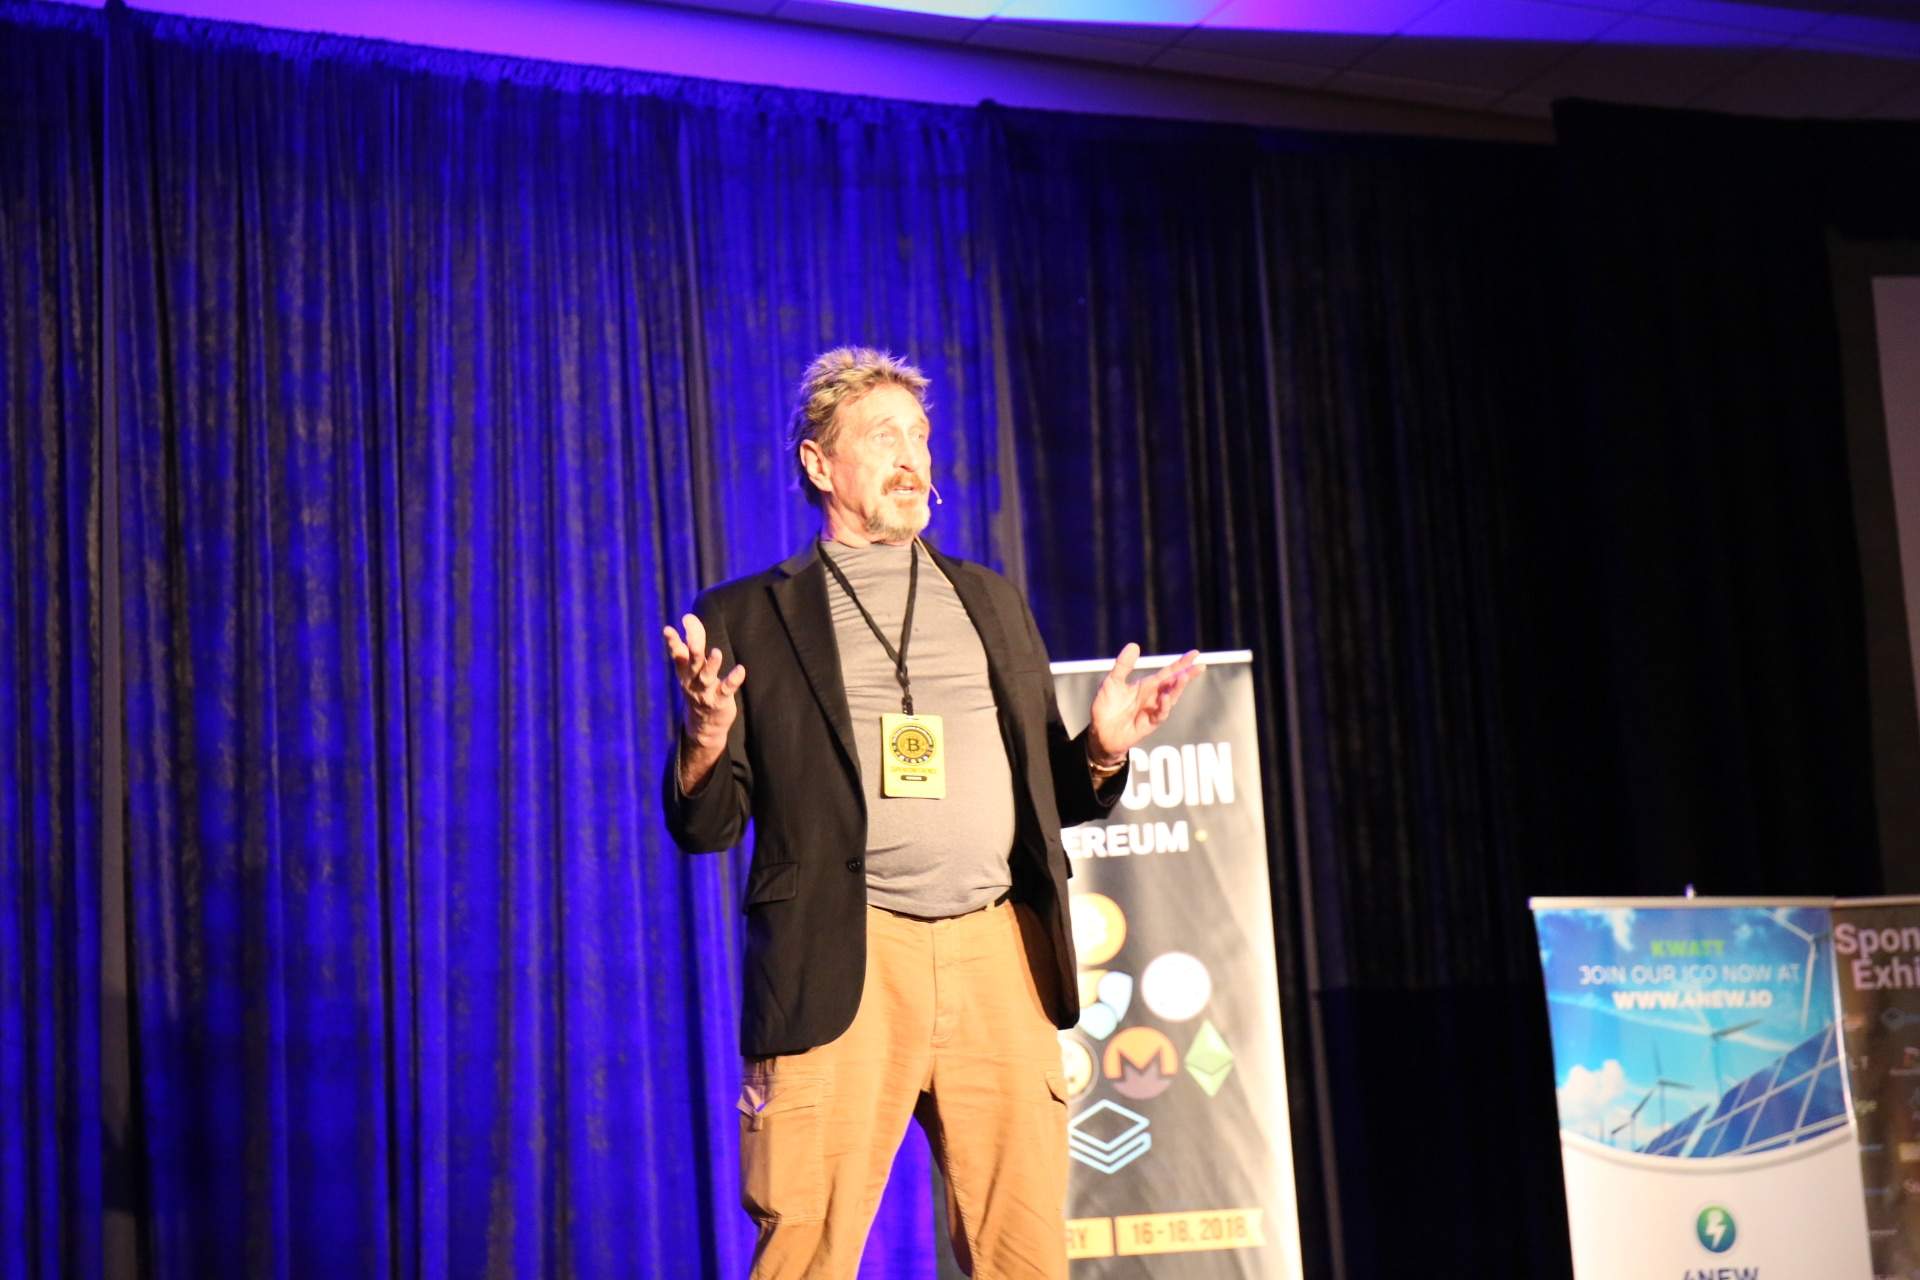 John Mcafee Remains Bullish About Crypto Prospects For 2018 And Beyond. Texas Bitcoin Ethereum Super Conference